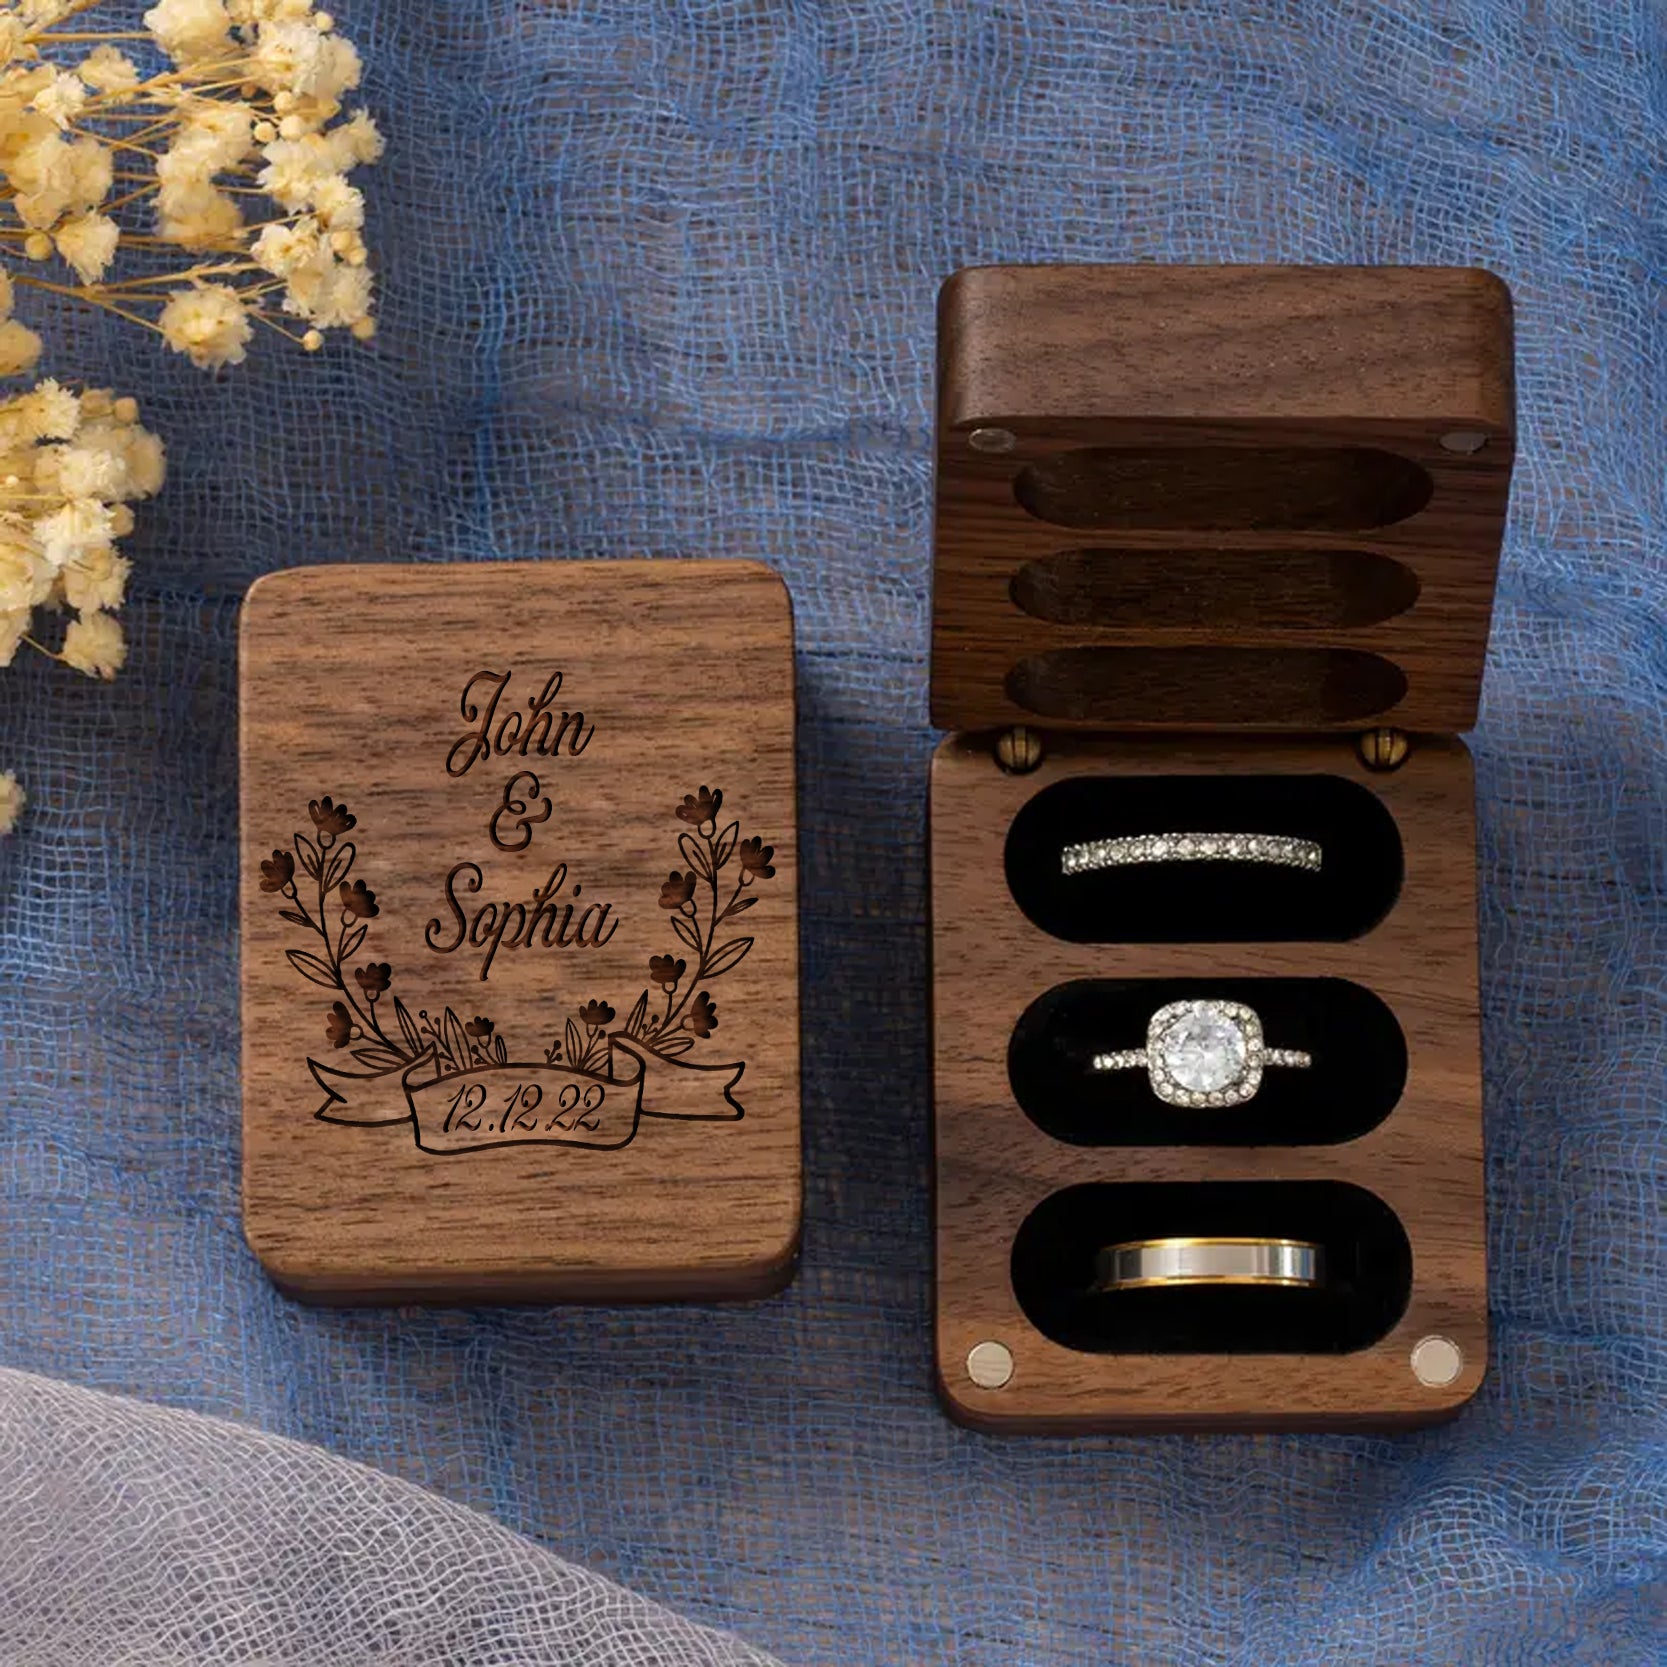 Custom Engraved Ring Box For Wedding Ceremony, Triple Wooden Ring Box, Wedding Engagement Ring Box, 3 Ring Bearer Ring Box, Proposal Ring Box Holder - Personalized Wooden Ring Box